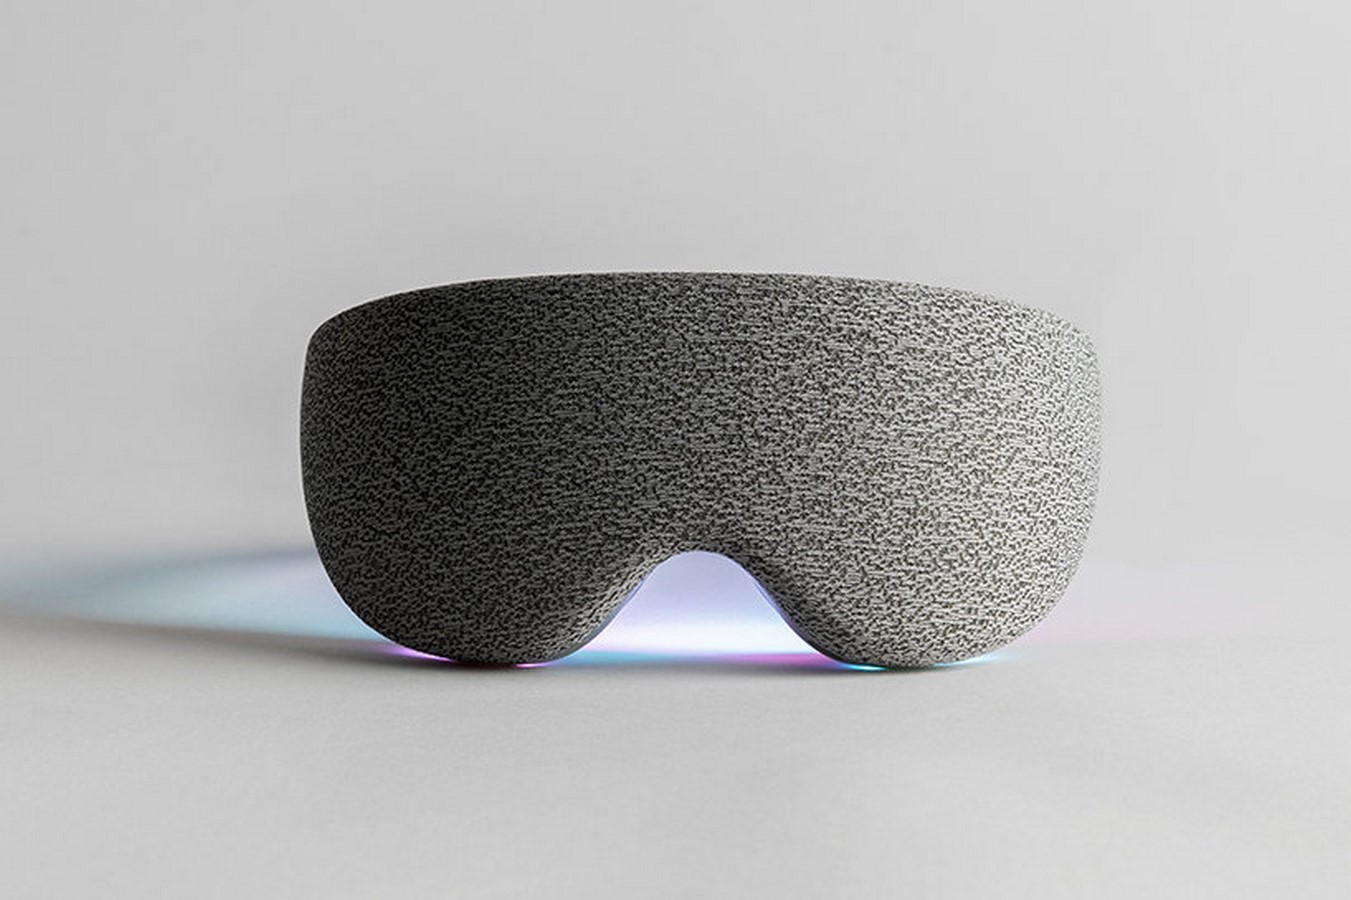 LightVision headset to enable "powerful meditation" launched by Layer - Sheet4